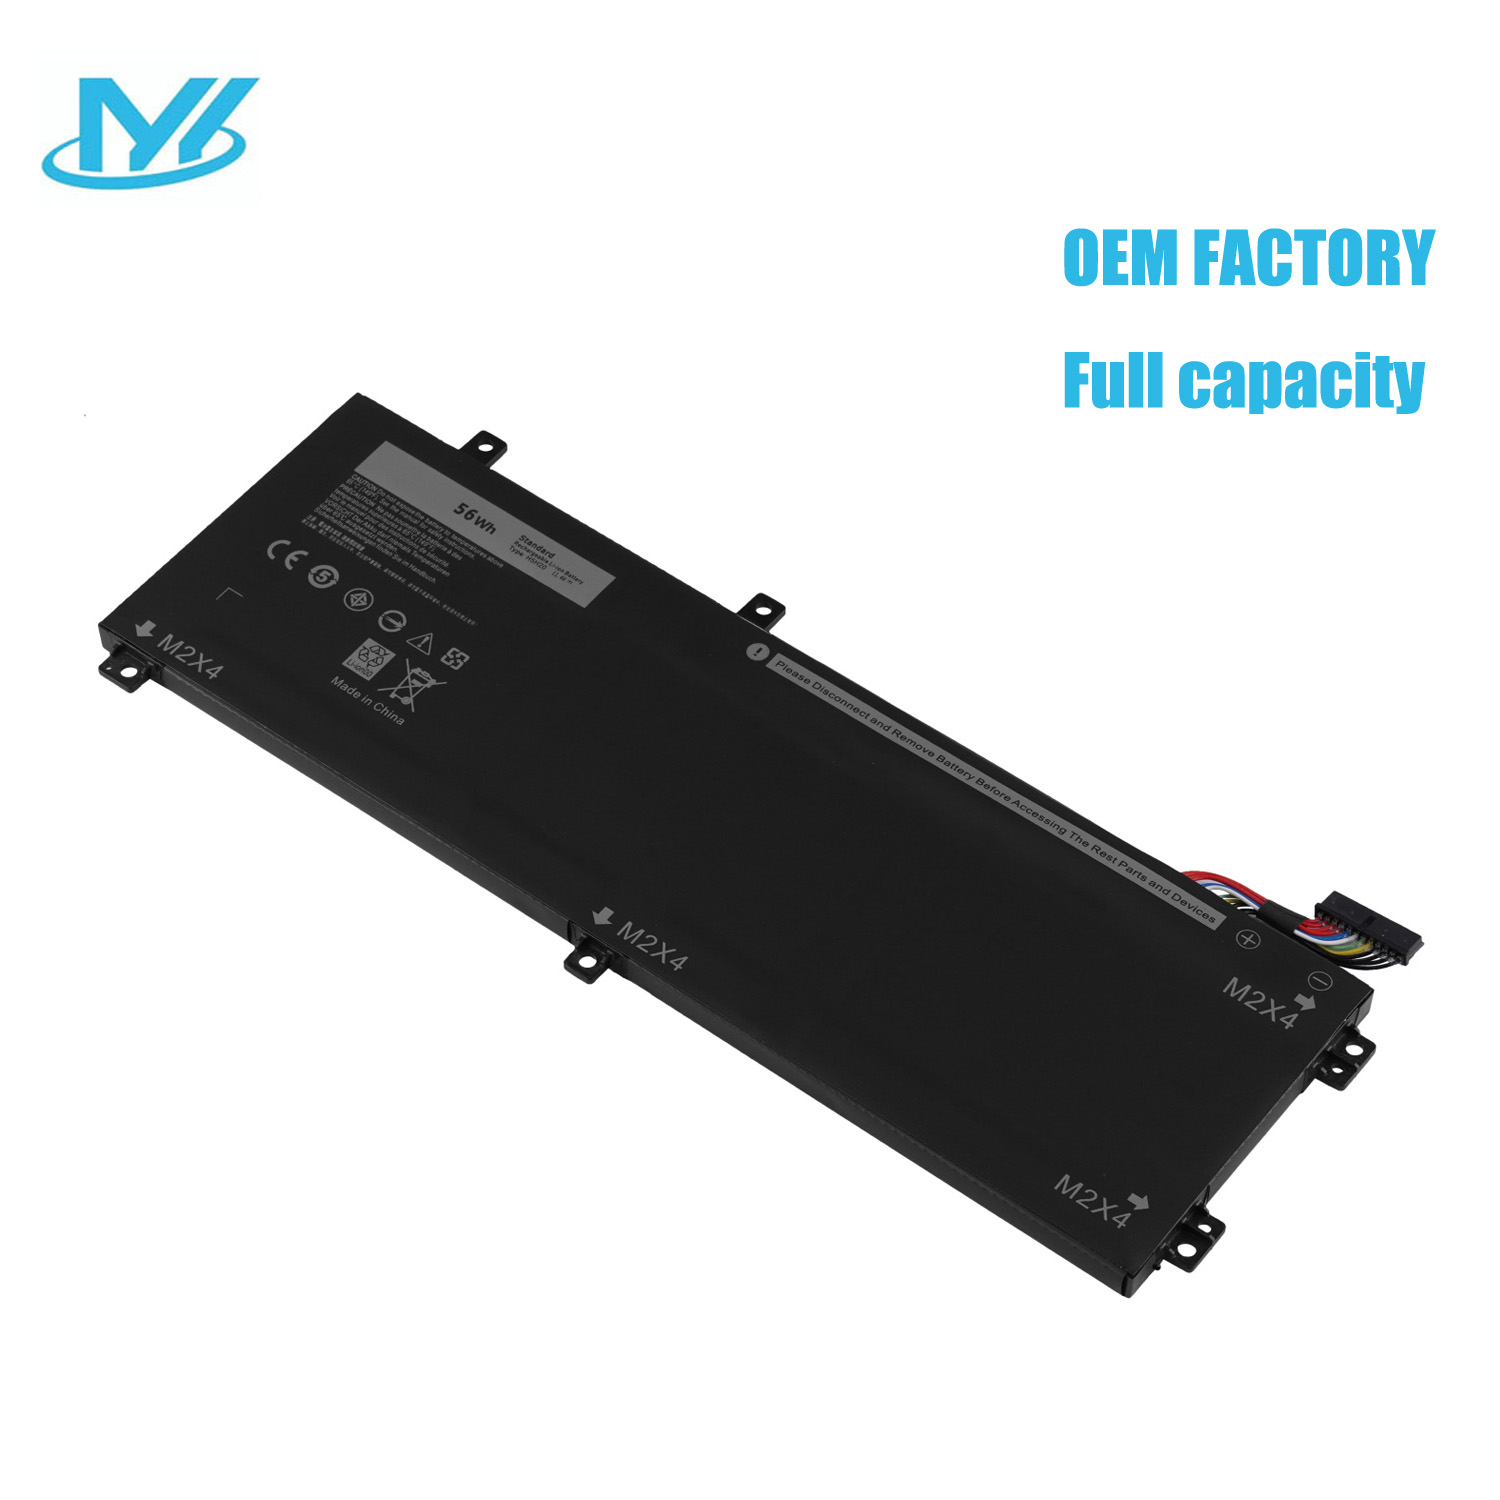 H5H20 11.4V 55Wh 4820mAh Replacement lithium ion laptop battery factory price For DELL Laptop XPS 15 9560 9570 1845 M5520